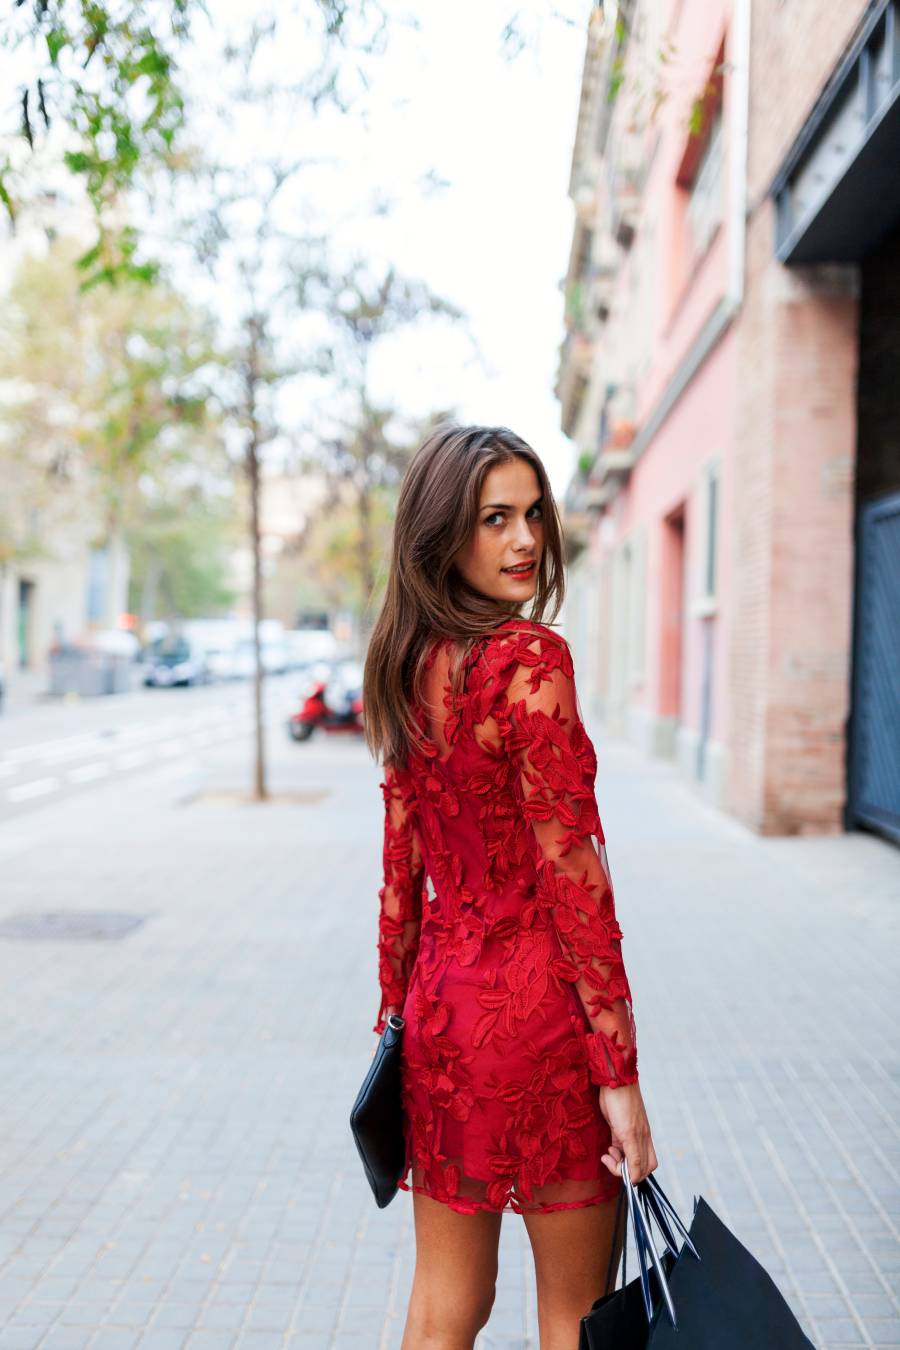 woman in a red dress going on date